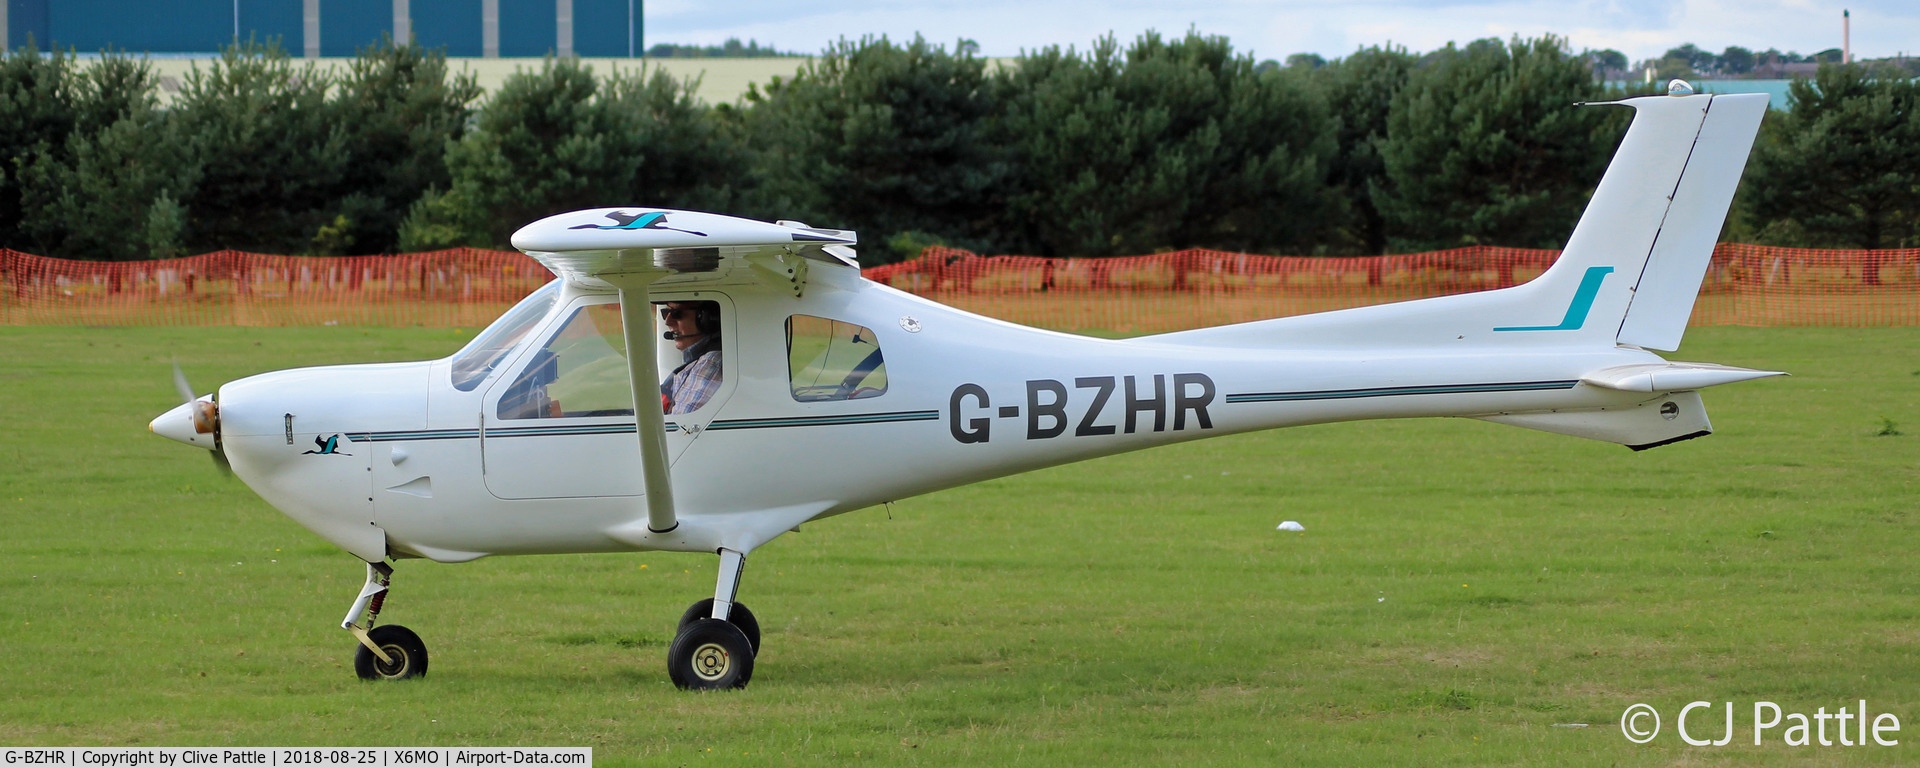 G-BZHR, 2001 Jabiru UL-450 C/N PFA 274A-13493, Present at the Montrose Air Station Heritage Centre light aircraft fly-in held on 25th August 2018.